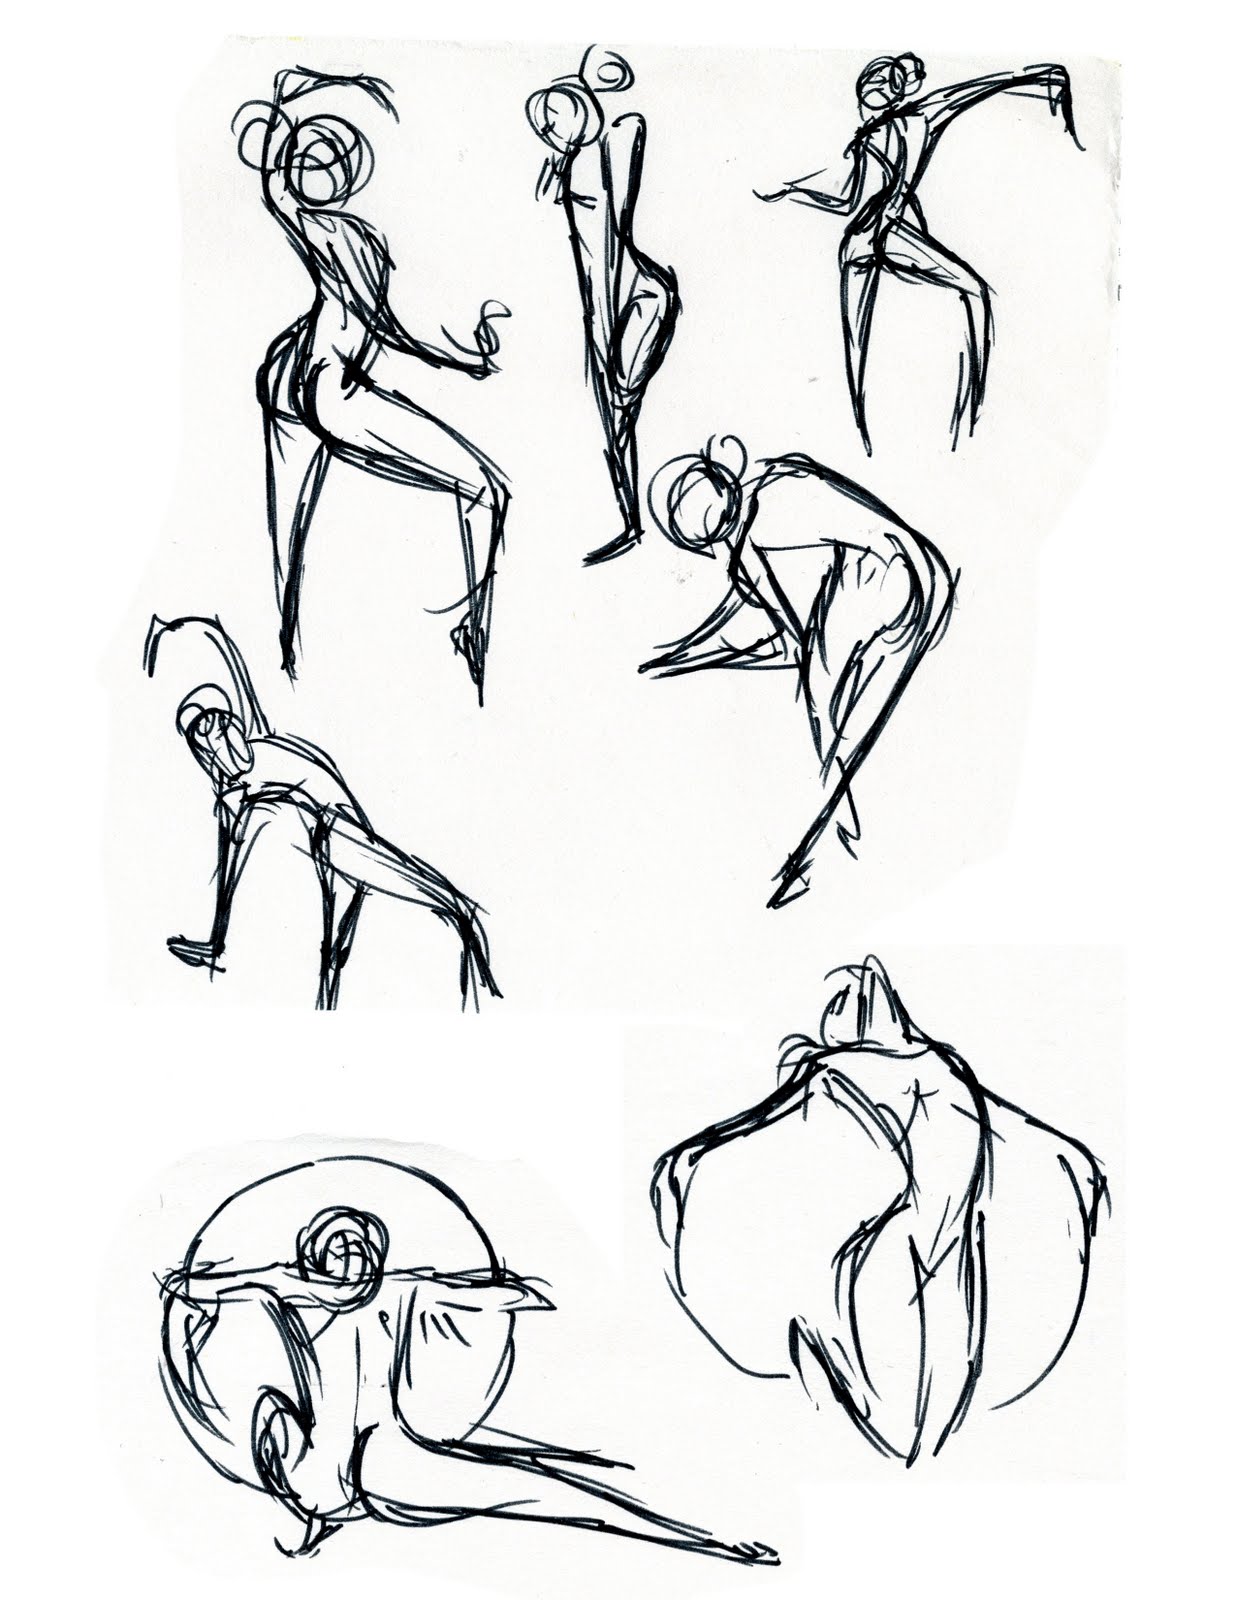 Guillermo's Blog: Gesture Drawing with Mr. Woo